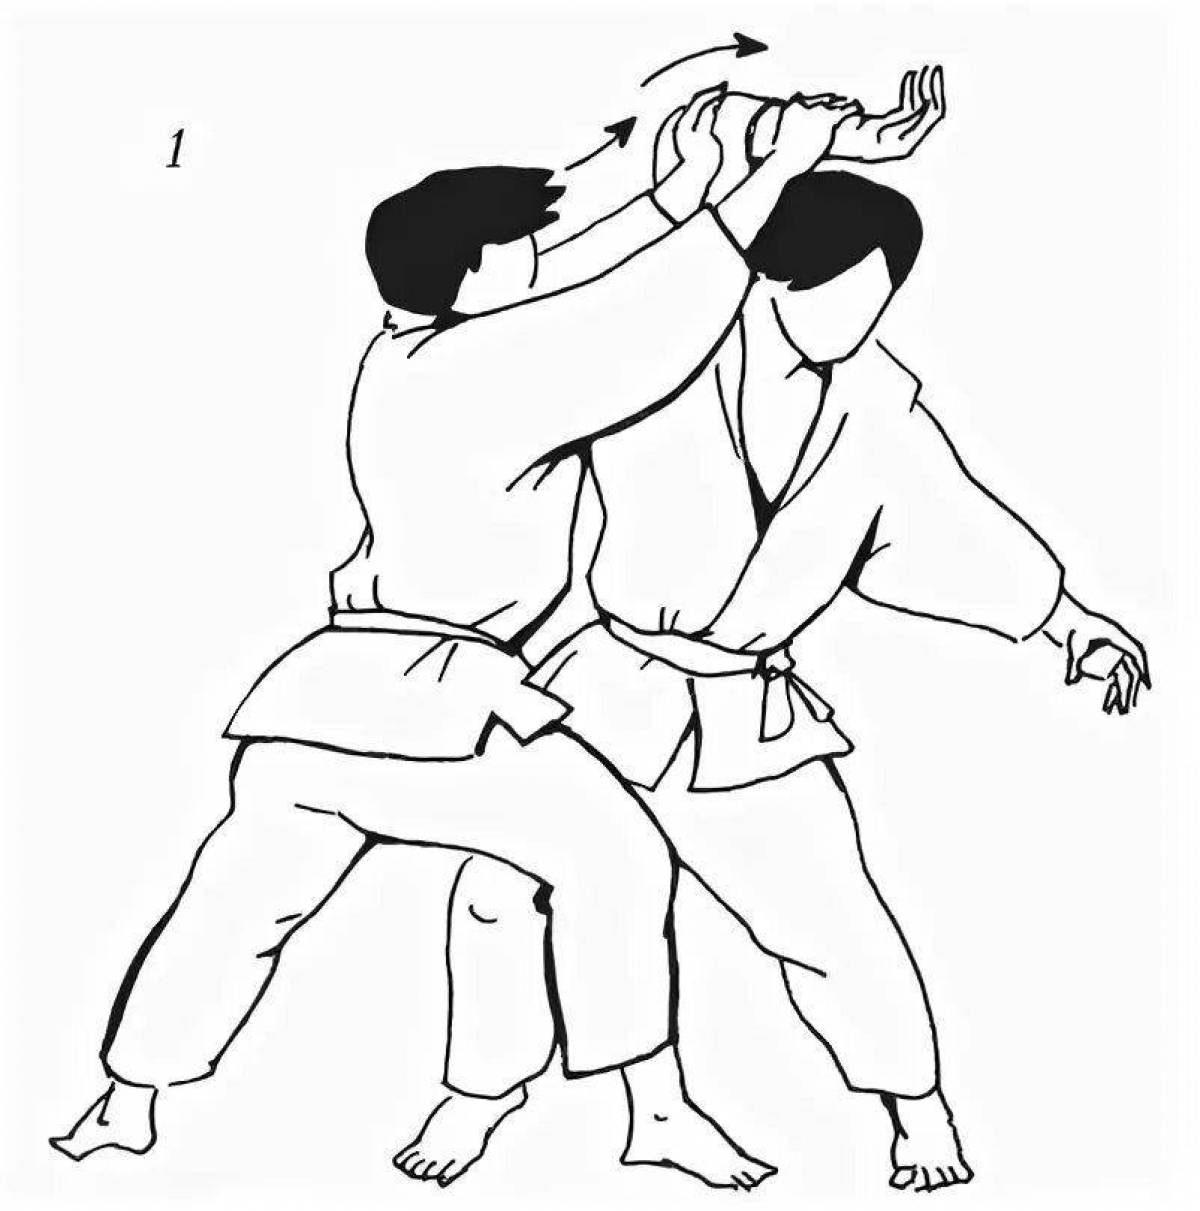 Colorful aikido coloring page